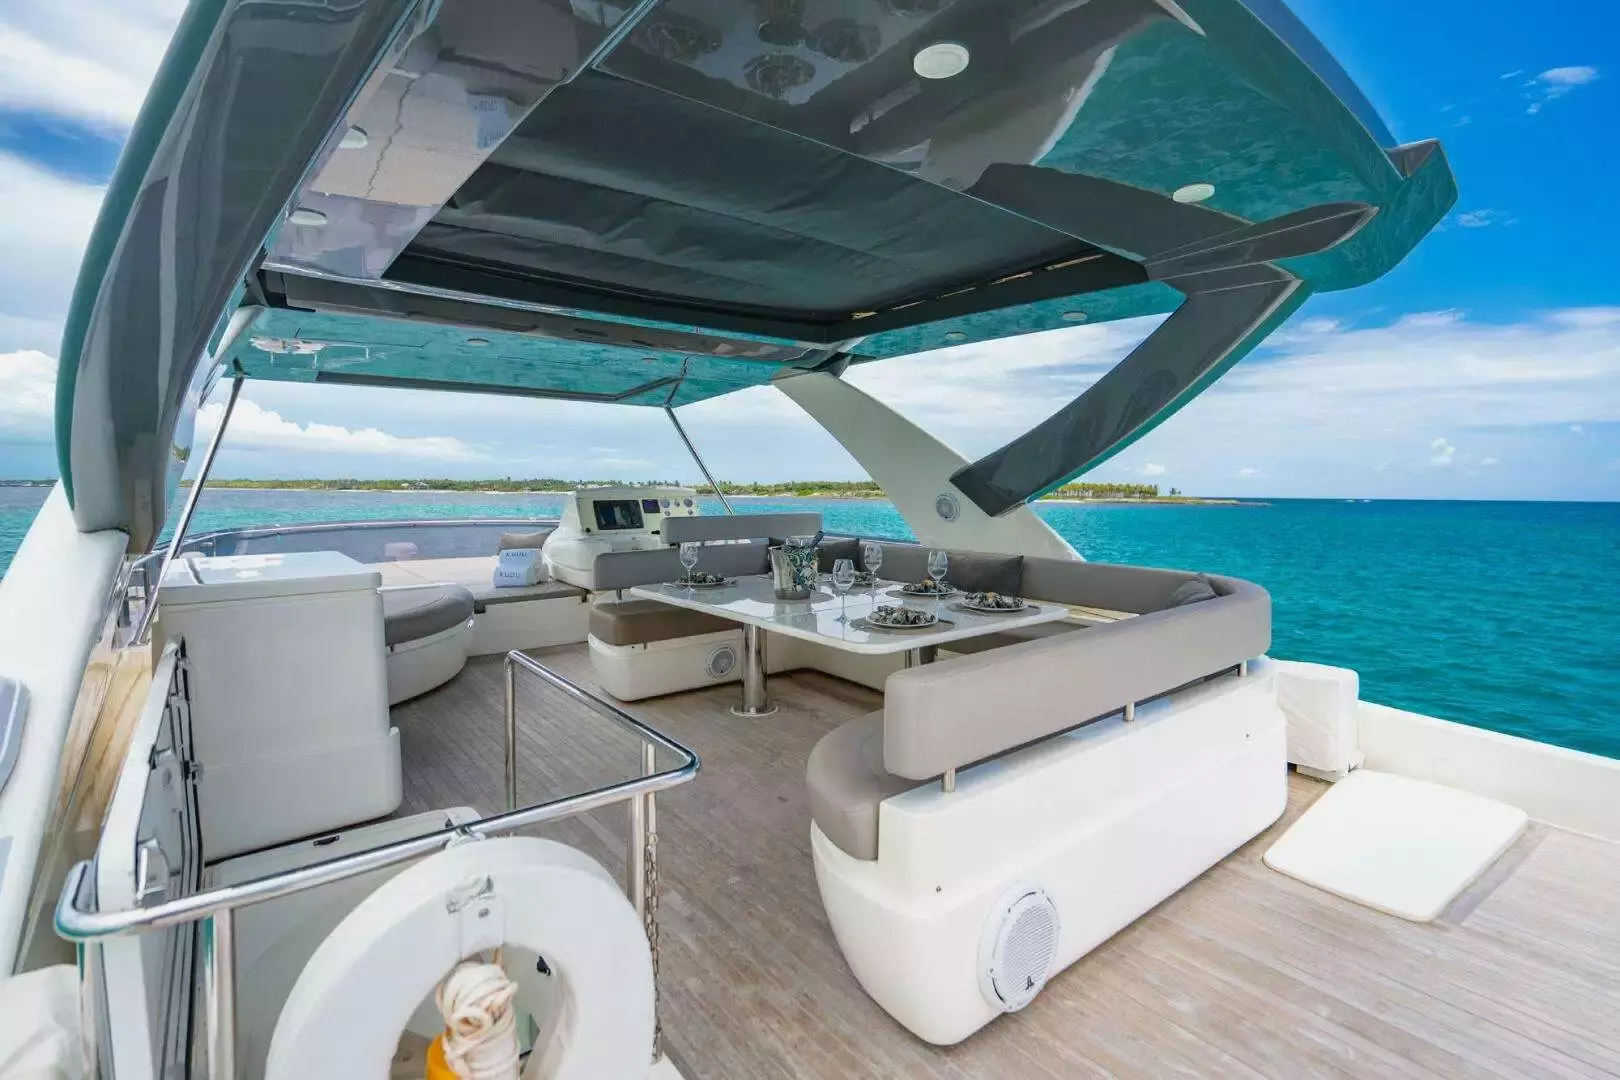 Kudu by Ferretti - Top rates for a Charter of a private Motor Yacht in Florida USA